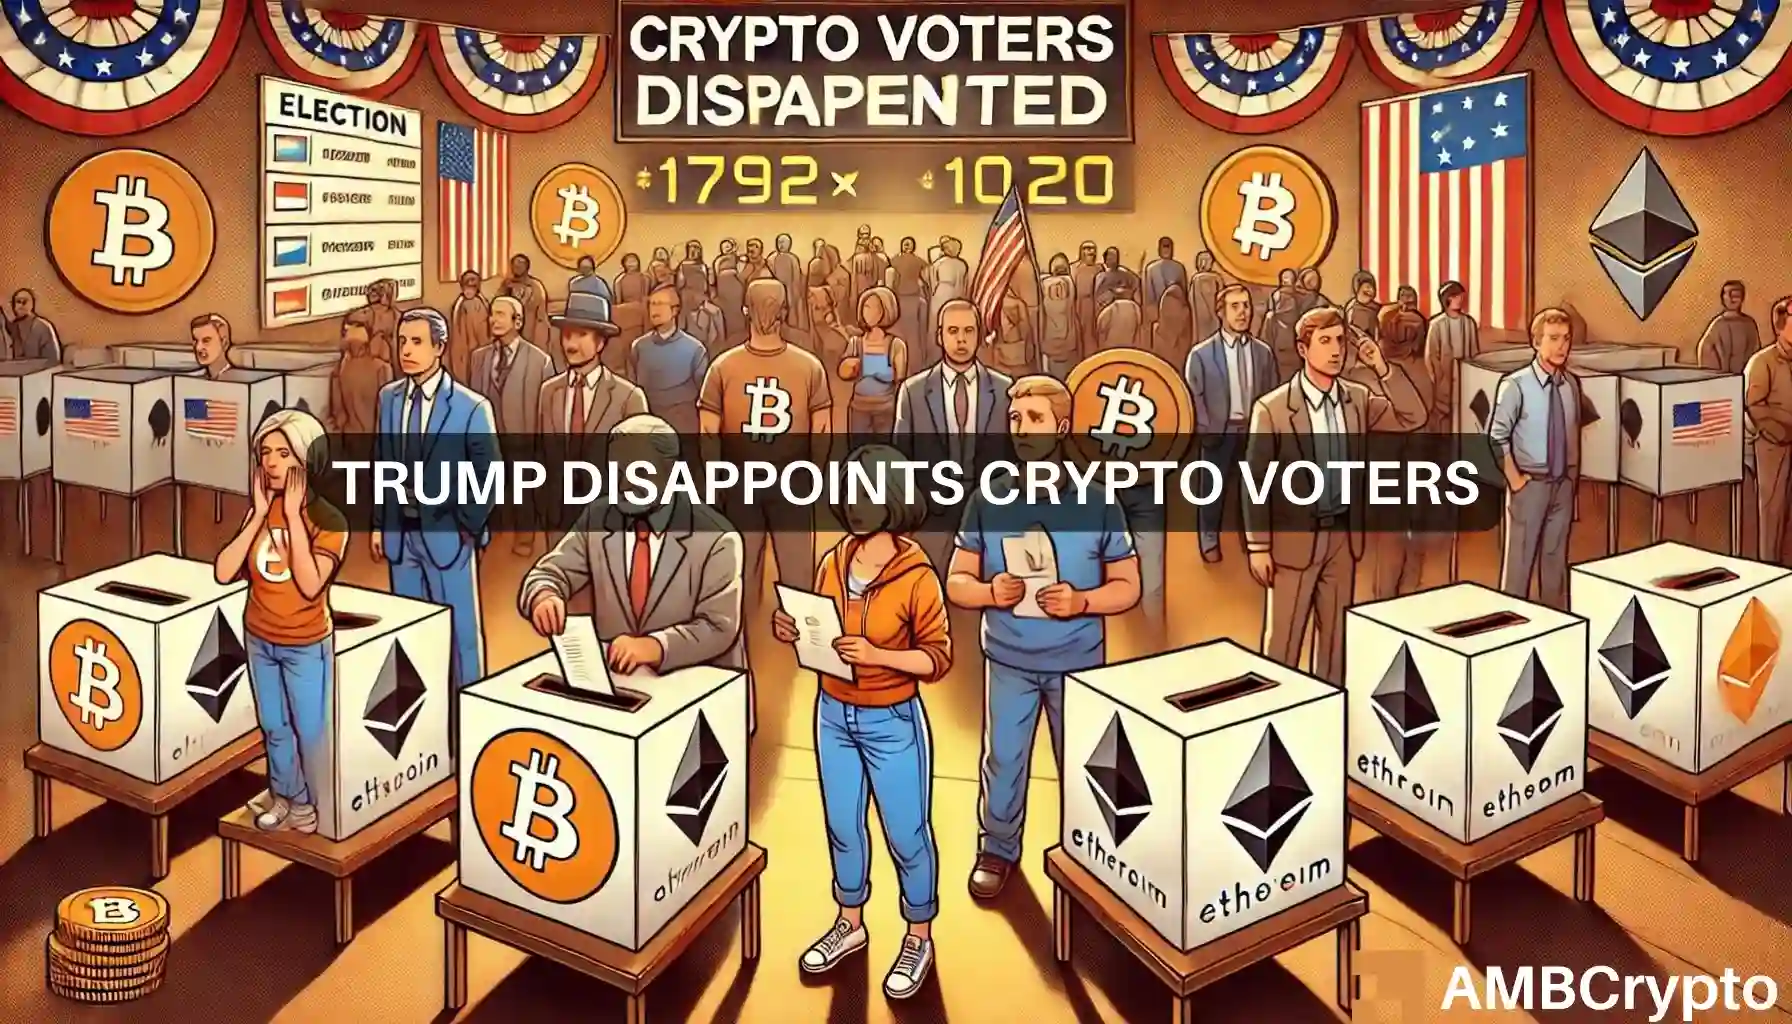 Trump disappoints crypto voters